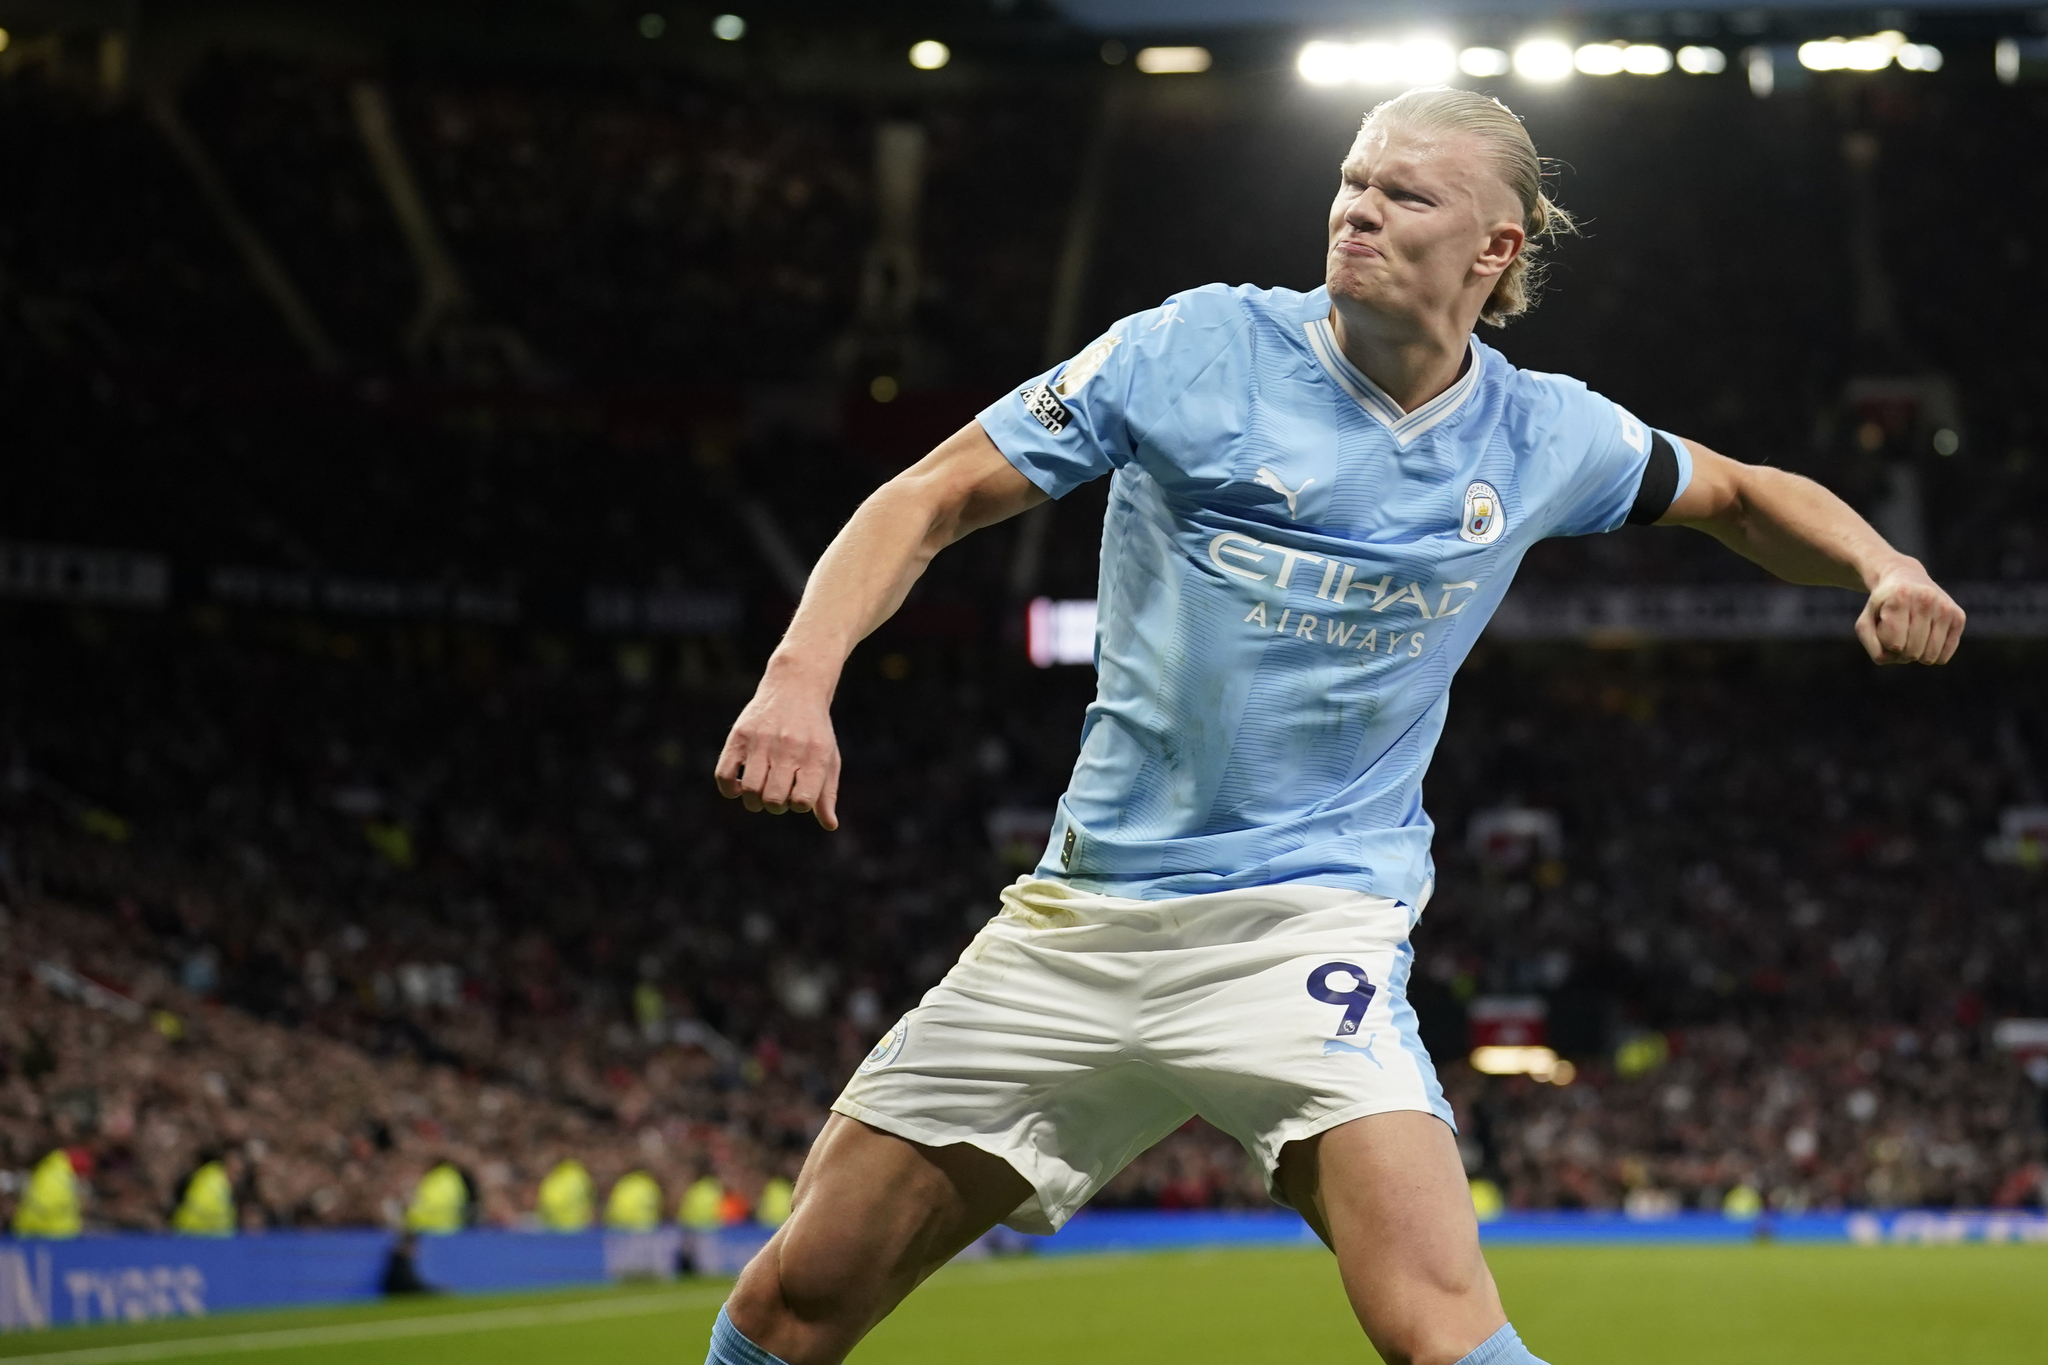 Manchester Citys Erling Haaland celebrates after scoring the opening goal